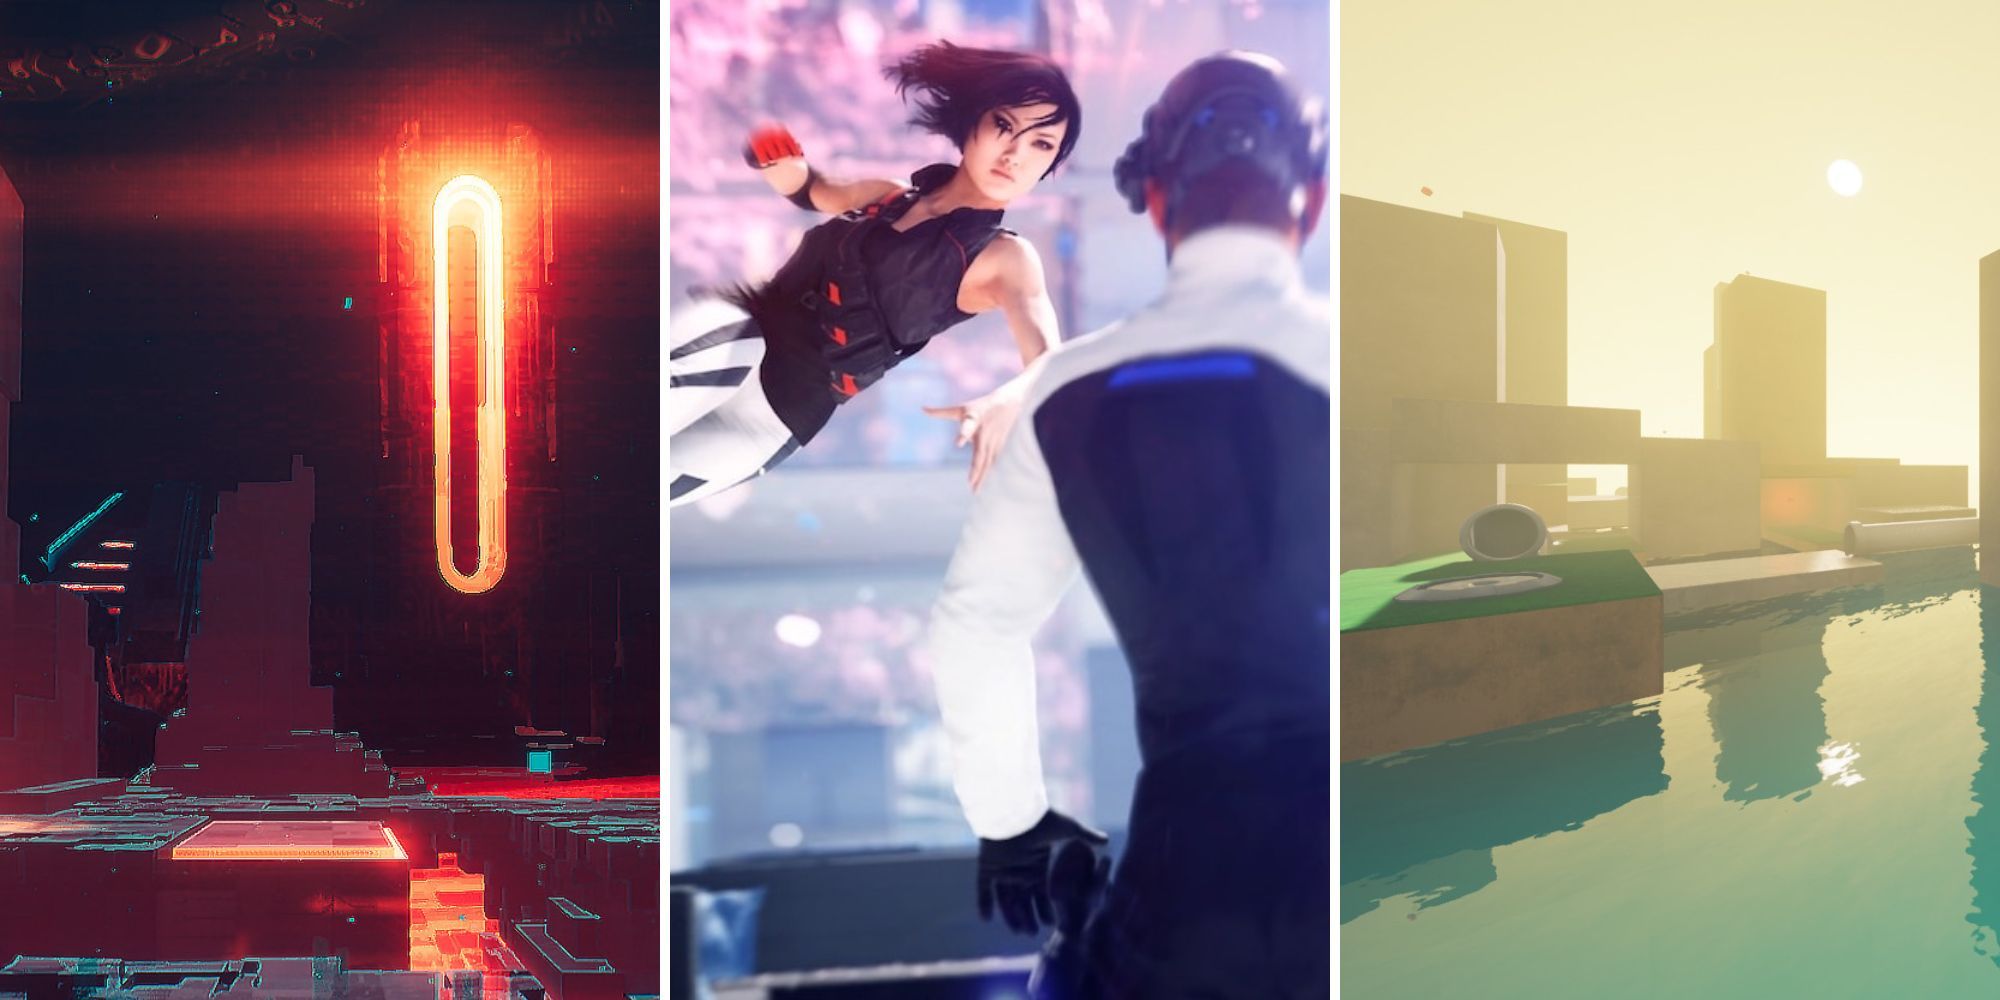 Levels from the games Ghostrunner and Refunct that include parkour and Faith leaping to punch an enemy in Mirror's Edge Catalyst